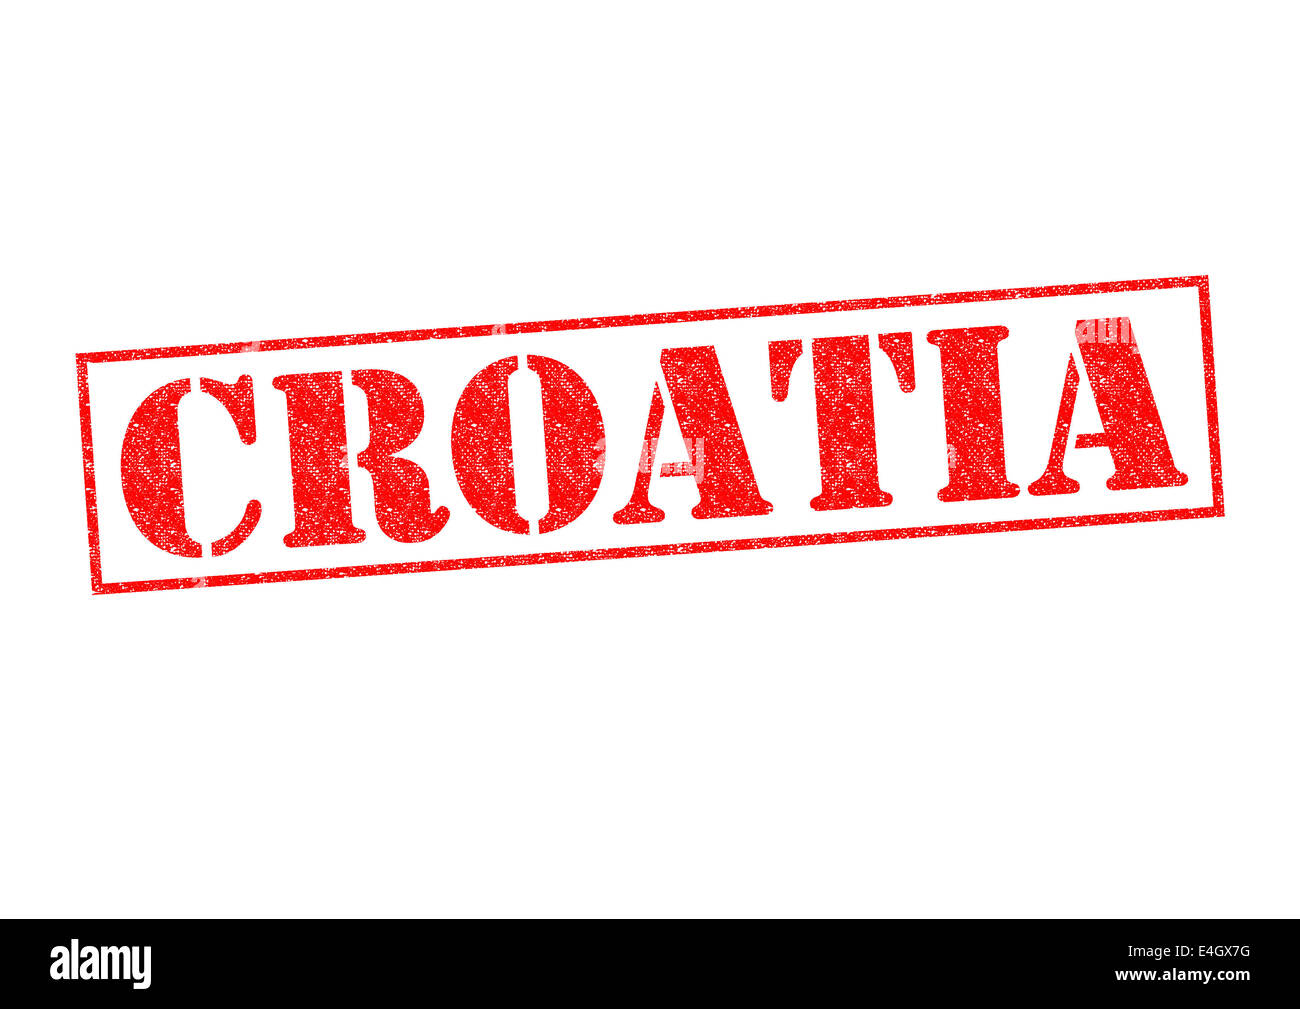 CROATIA Rubber Stamp over a white background. Stock Photo